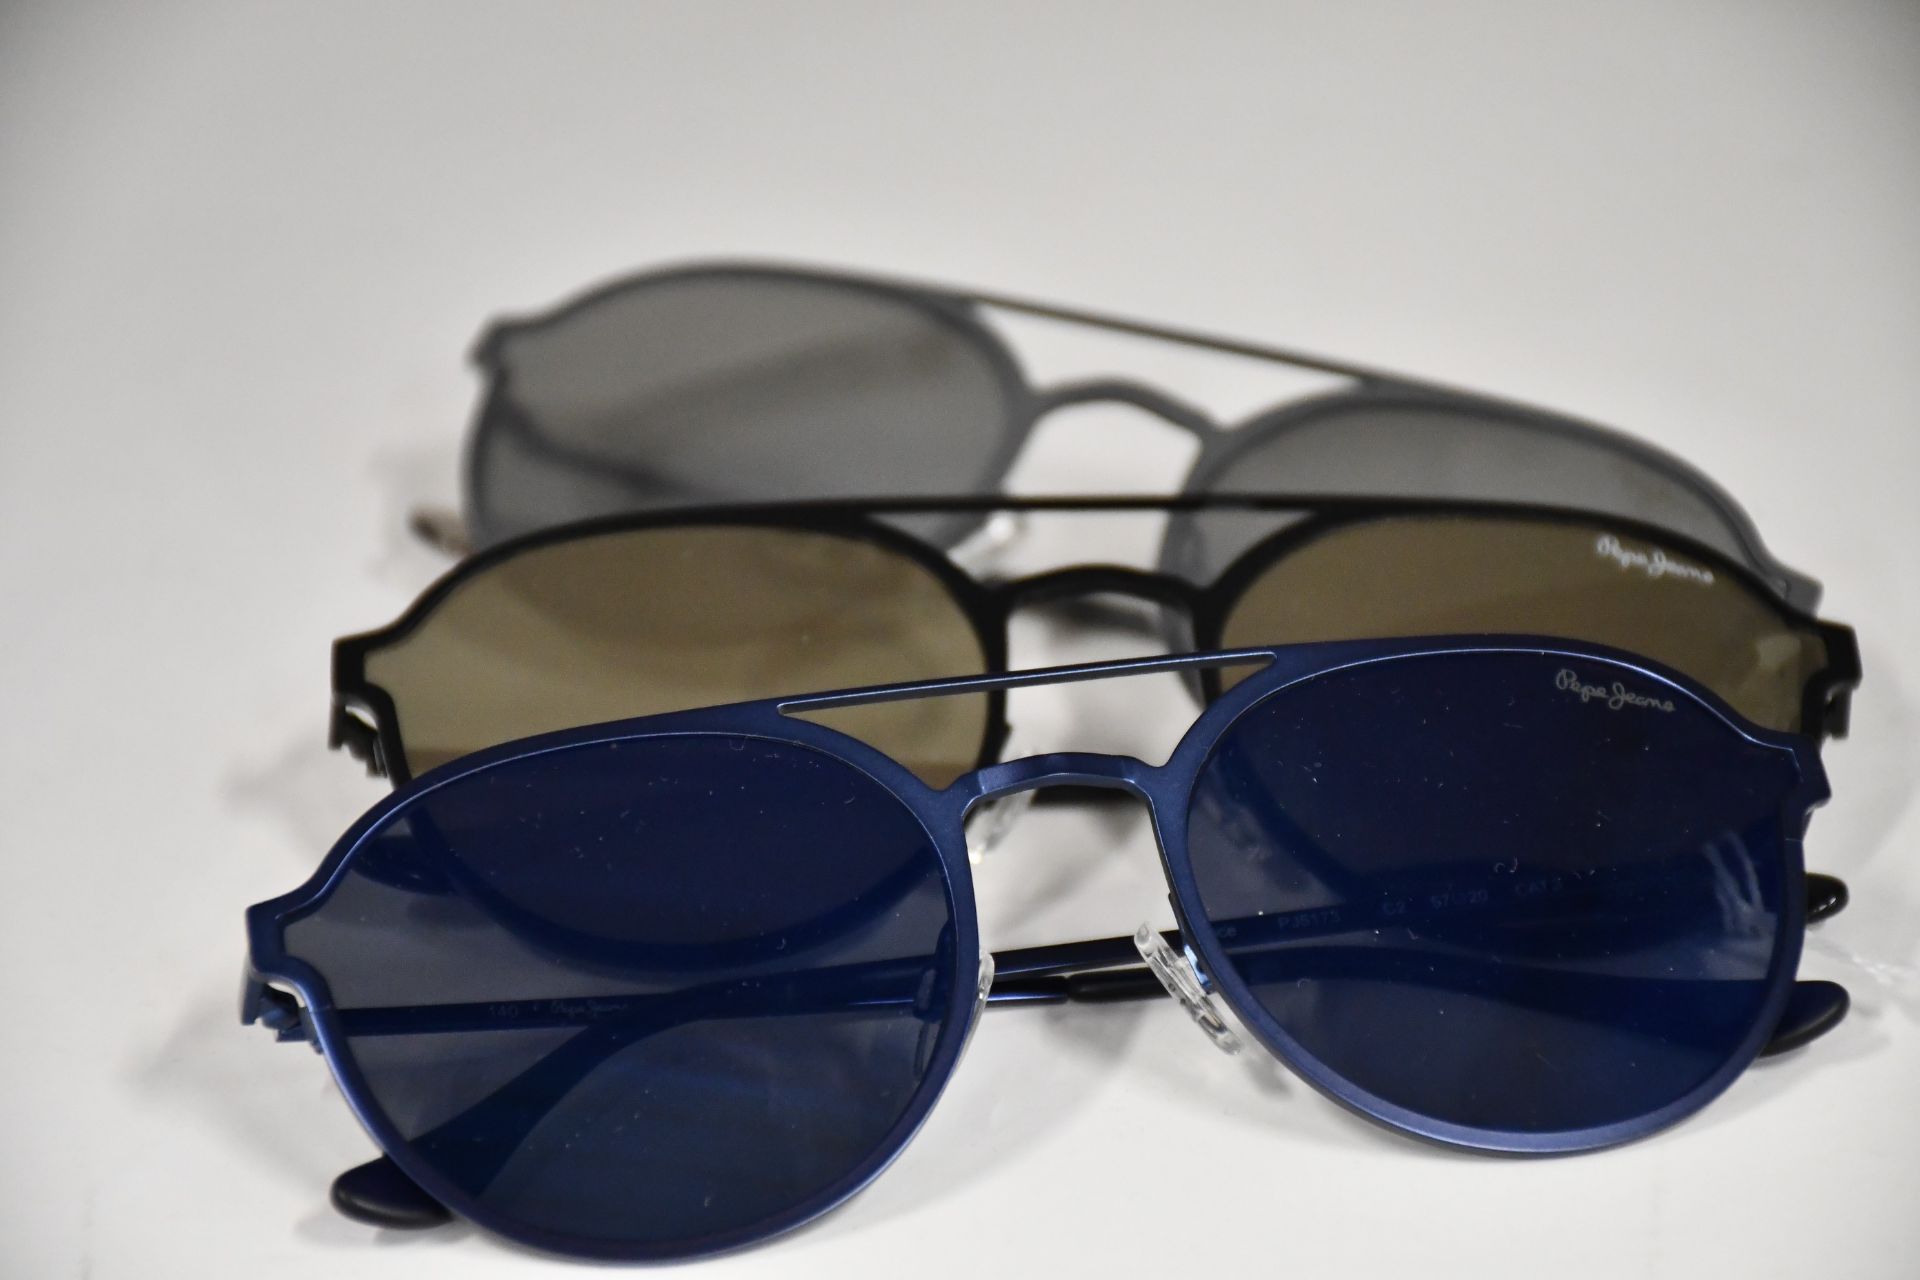 Three pairs of as new Pepe Jeans Grace sunglasses (No cases).